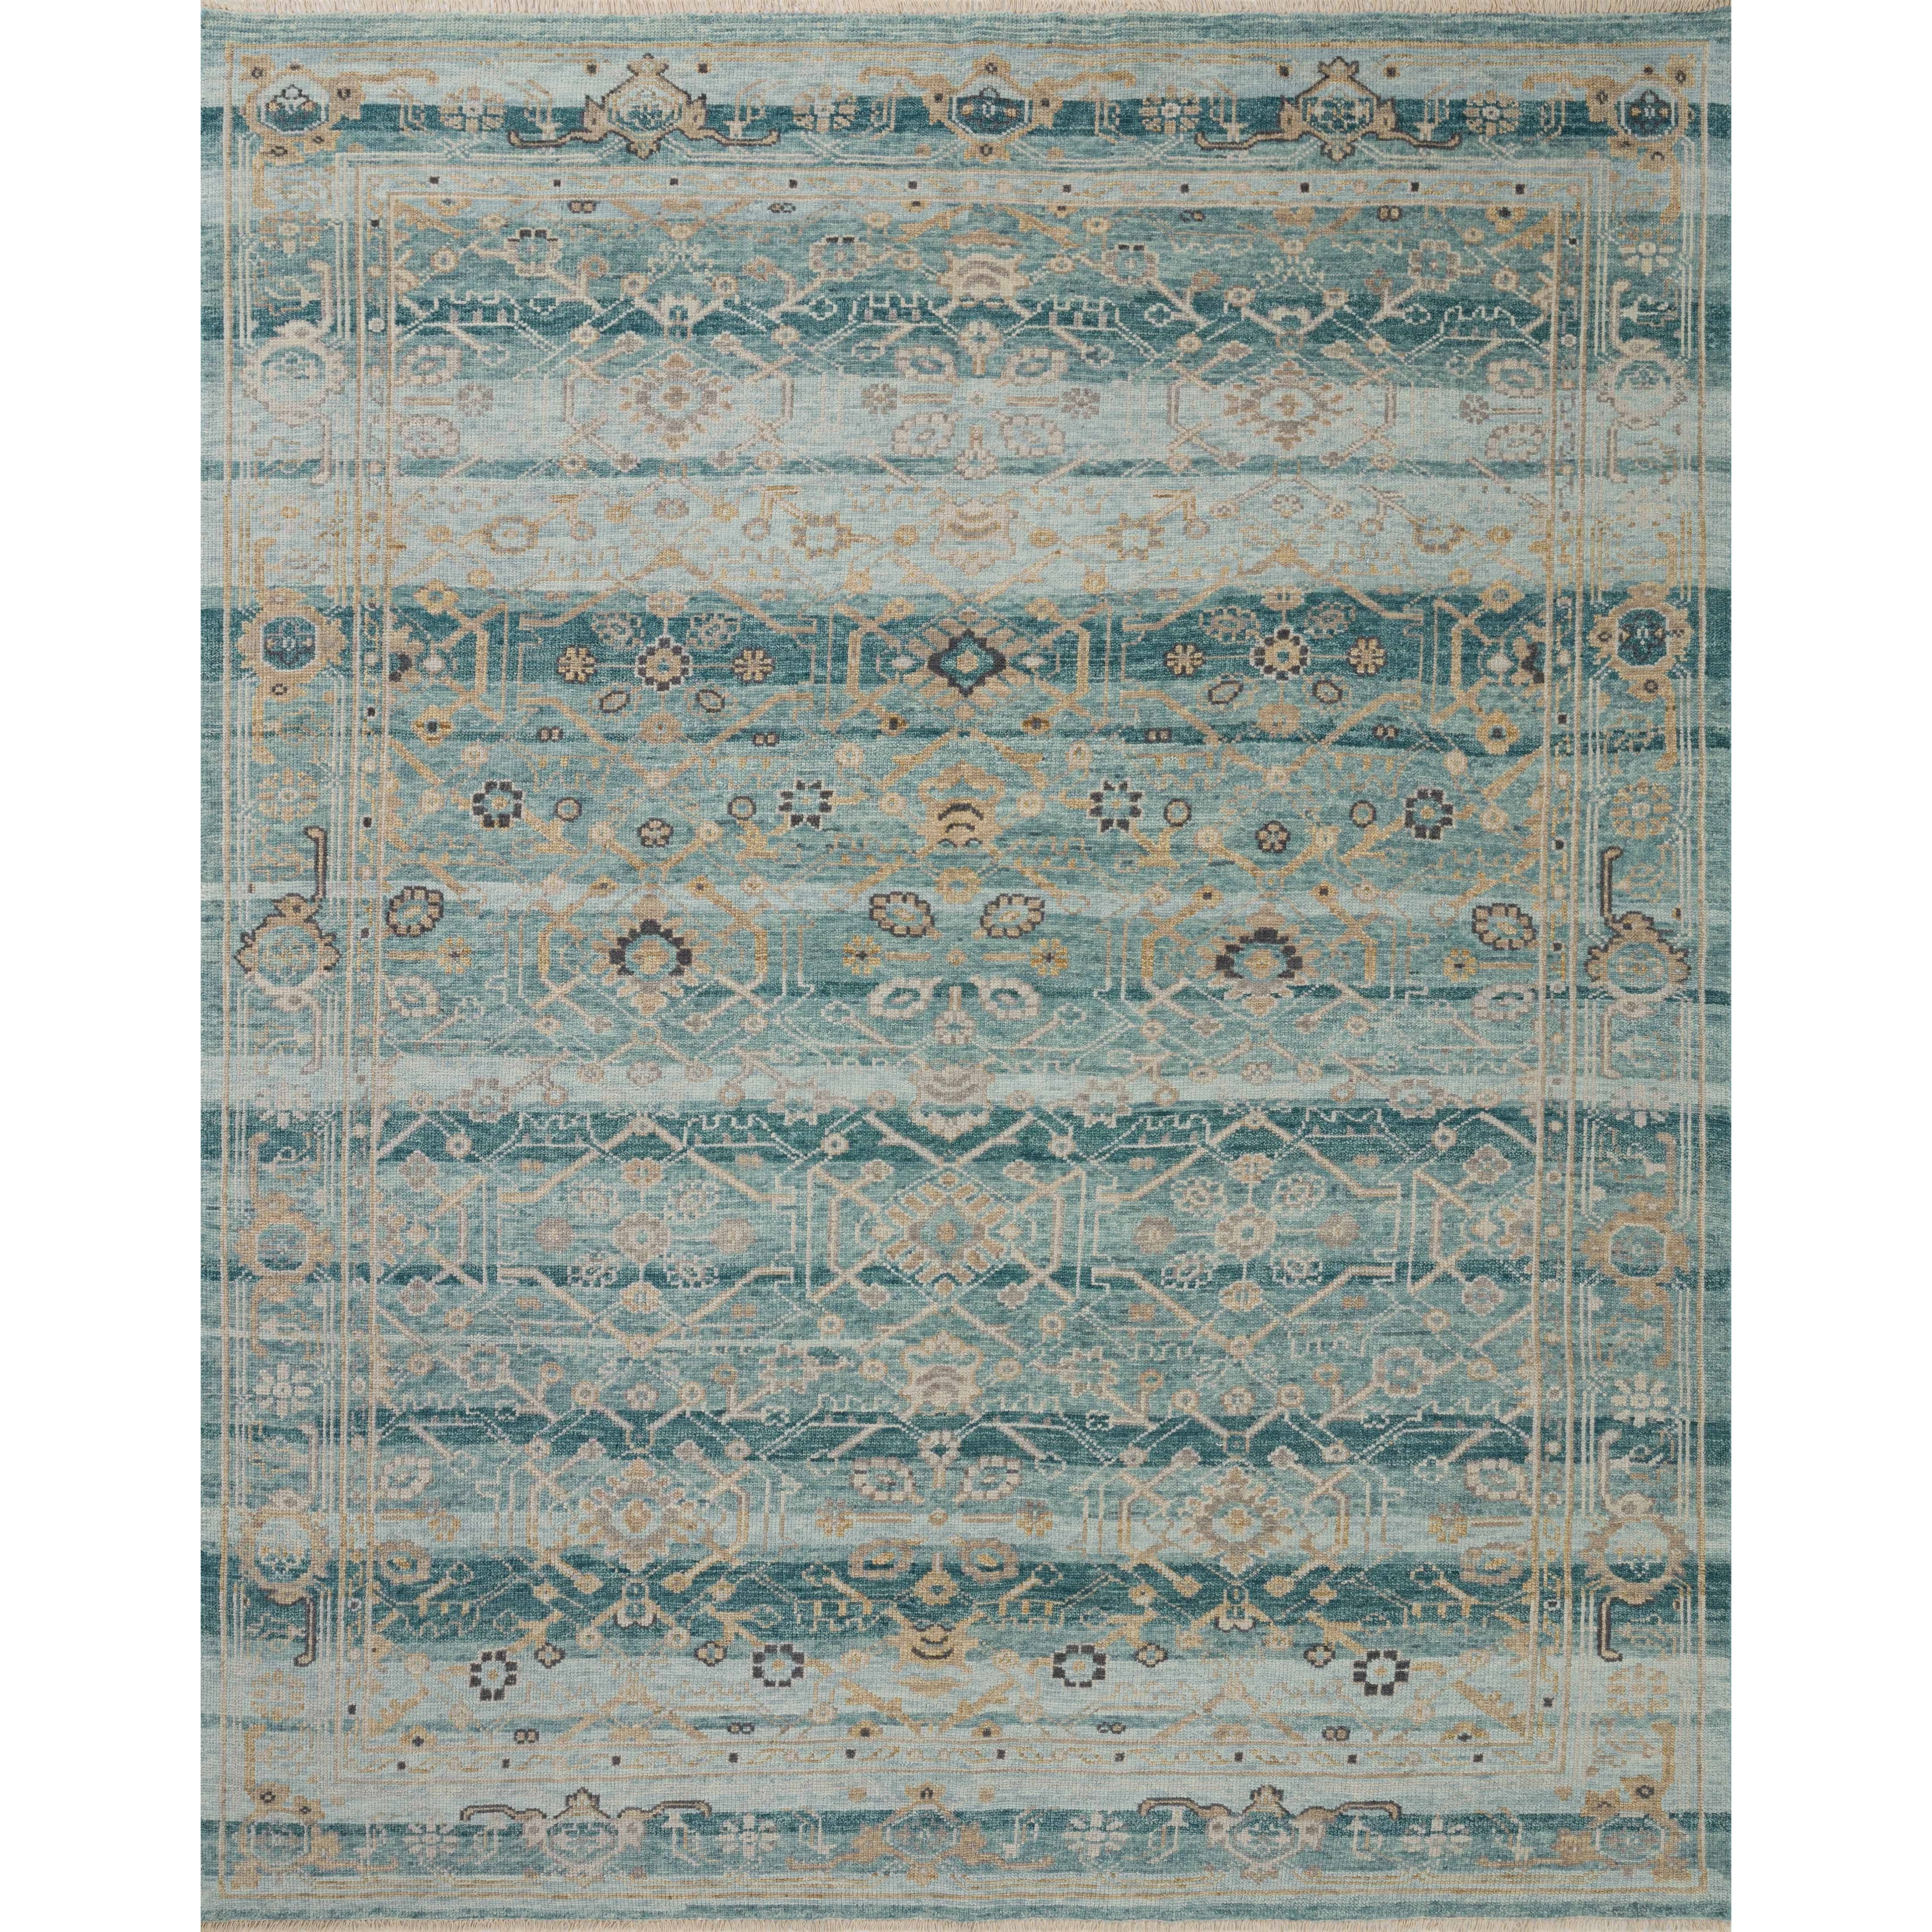 The hand-knotted Dominic Collection features loose, freeform motifs that give the rug a sense of depth and romance. Dominic’s shade-shifting palette is based on the horizontal lines of varying tones you’d encounter in antique Persian rugs. This GoodWeave certified collection is made of wool and cotton in India, ensuring our commitment to ethical production and the support of weavers’ communities.Amethyst Home provides interior design, new construction, custom furniture, and rugs for Houston metro area